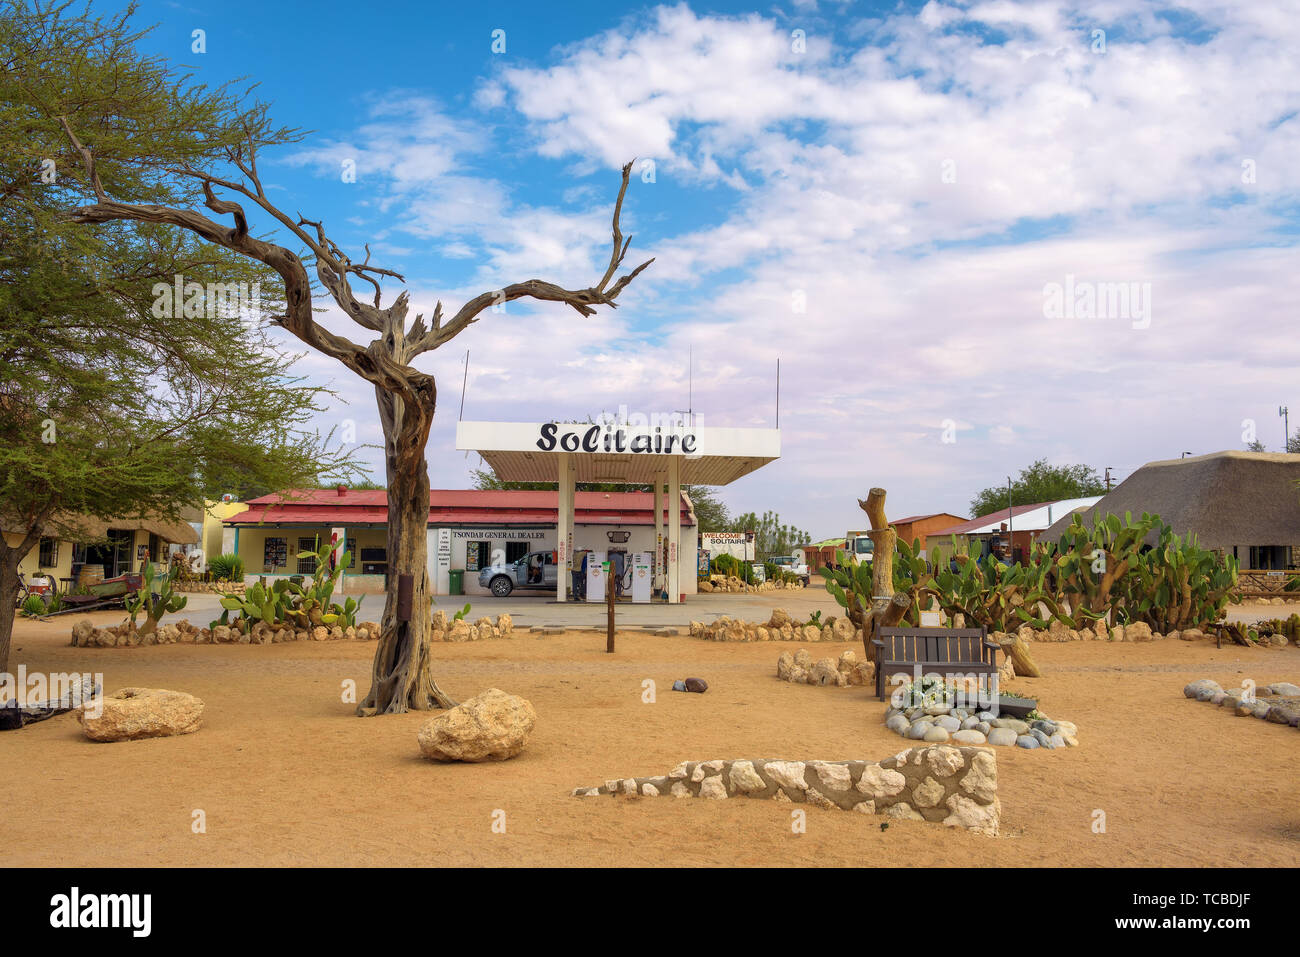 Solitaire gas station near the Namib-Naukluft National Park in Namibia Stock Photo